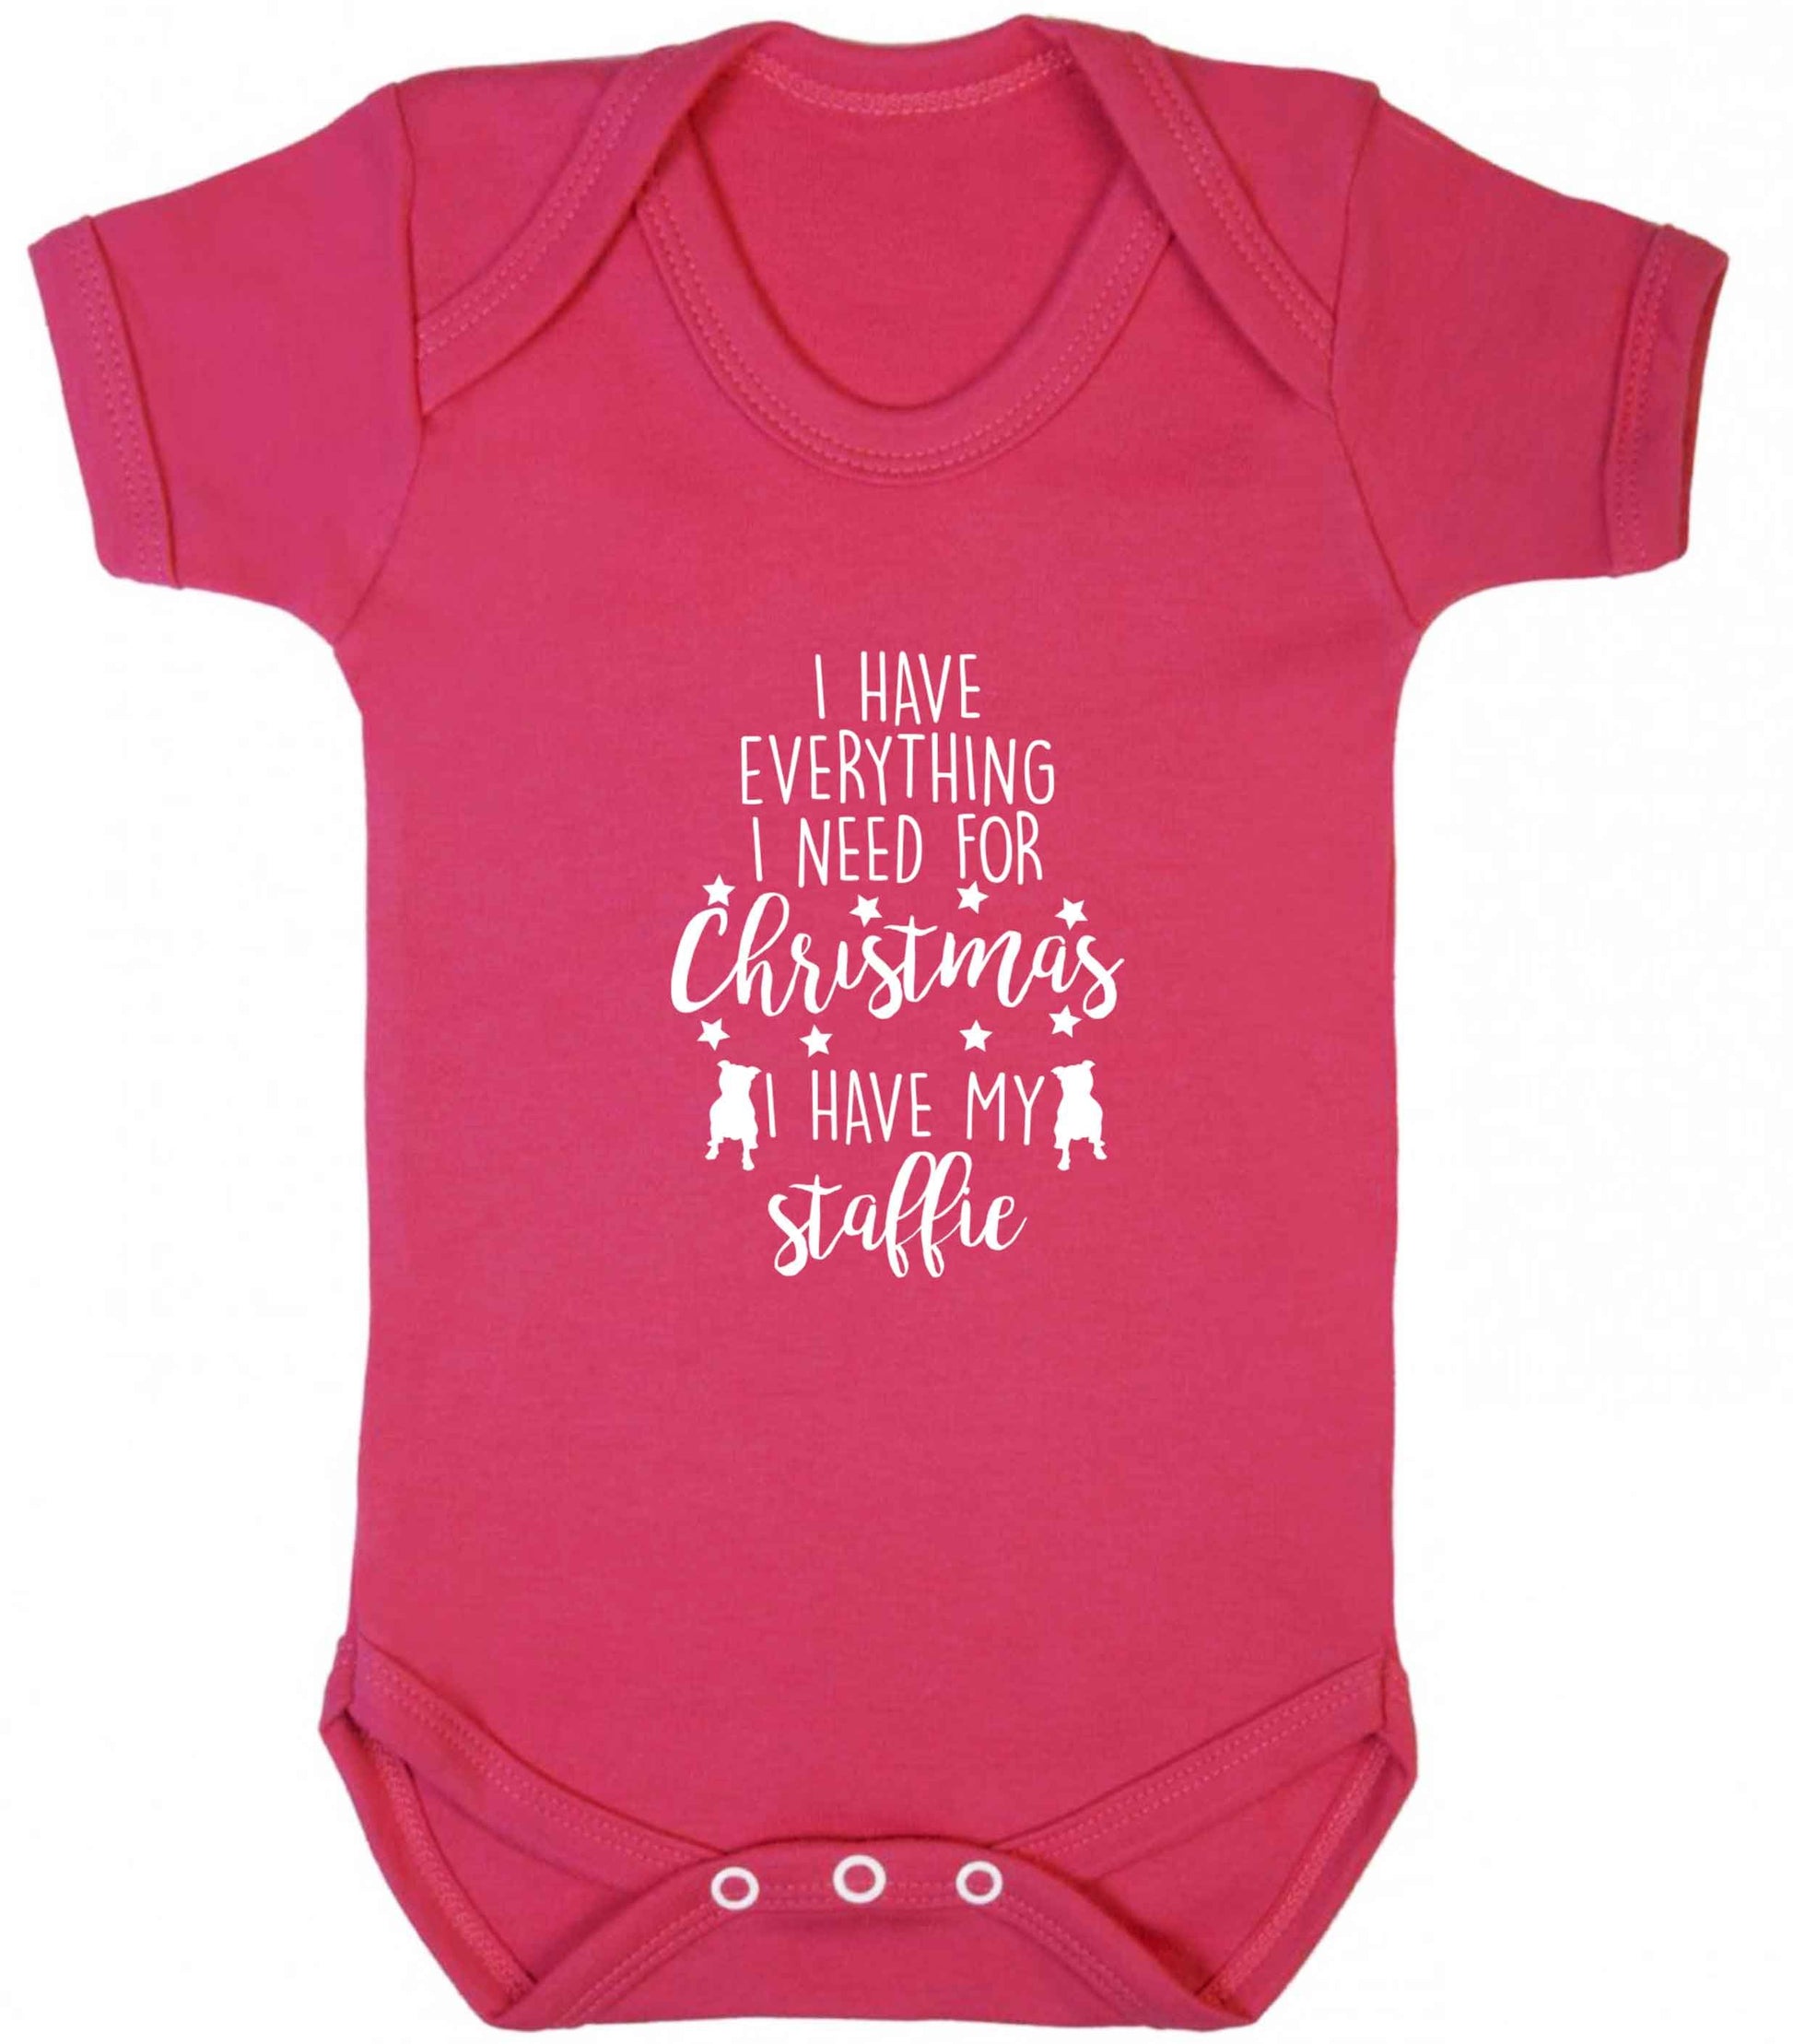 I have everything I need for Christmas I have my staffie baby vest dark pink 18-24 months